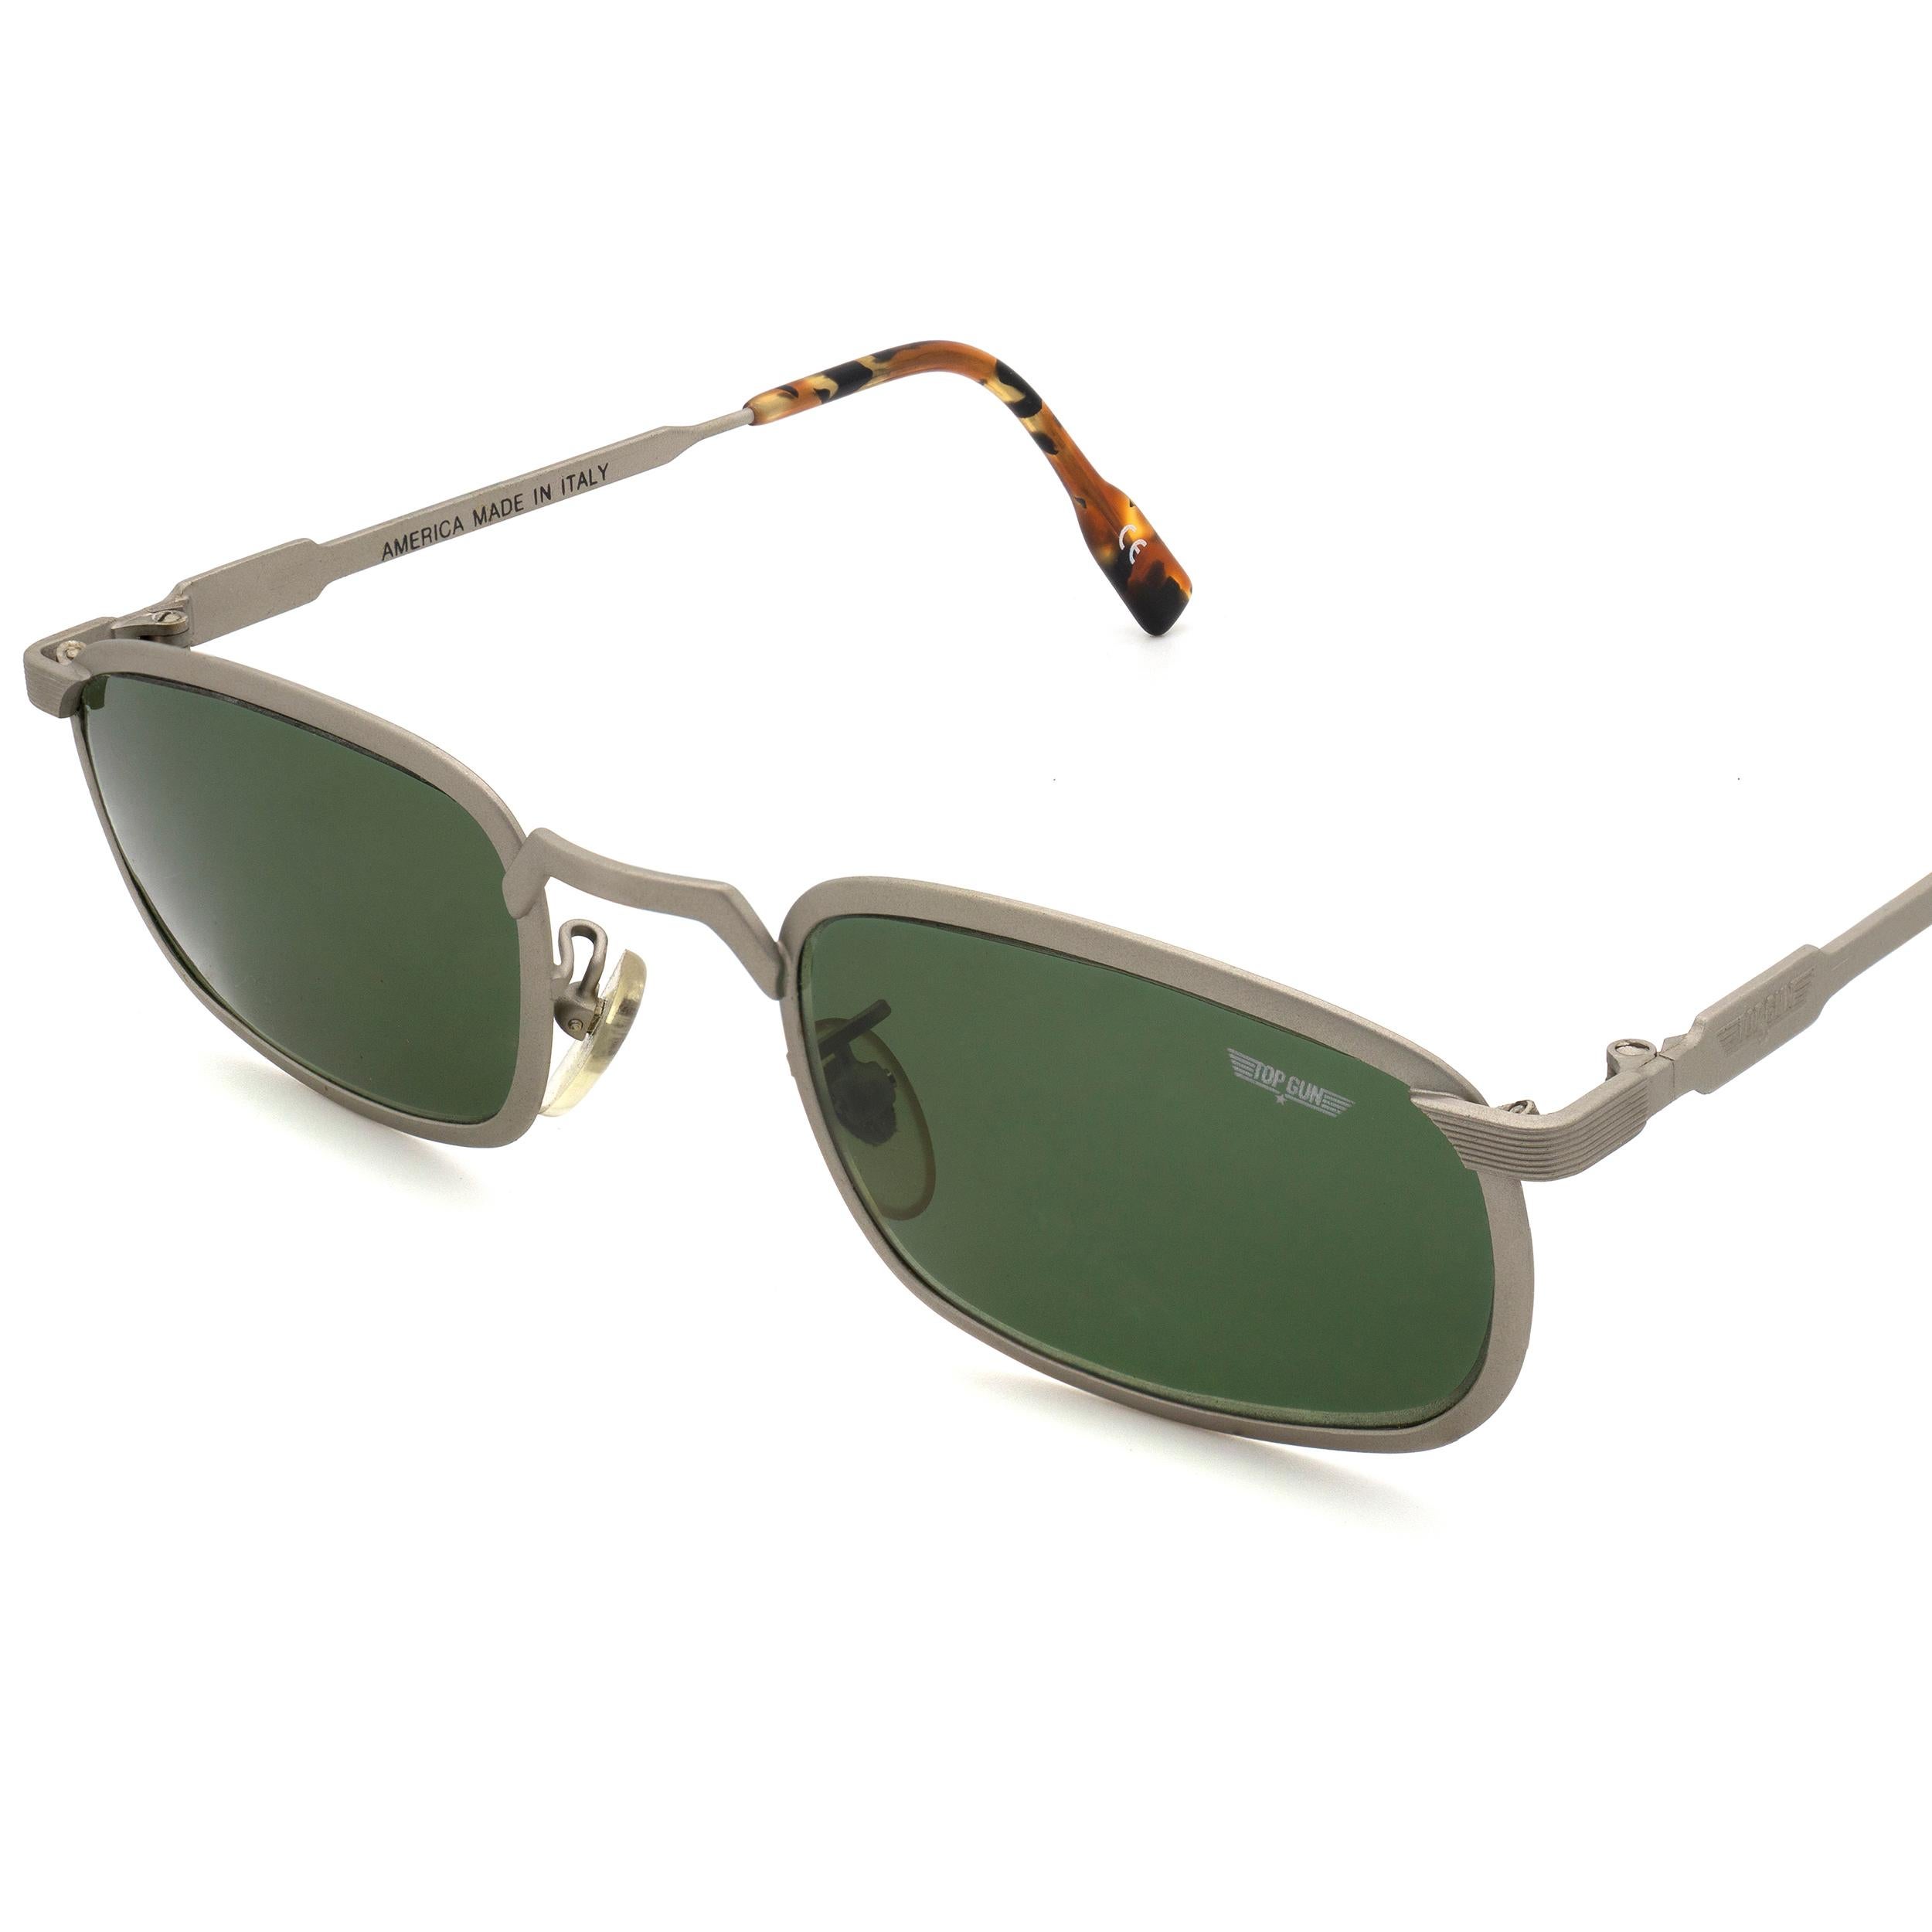 Gray Top Gun vintage sunglasses, Italy 90s For Sale